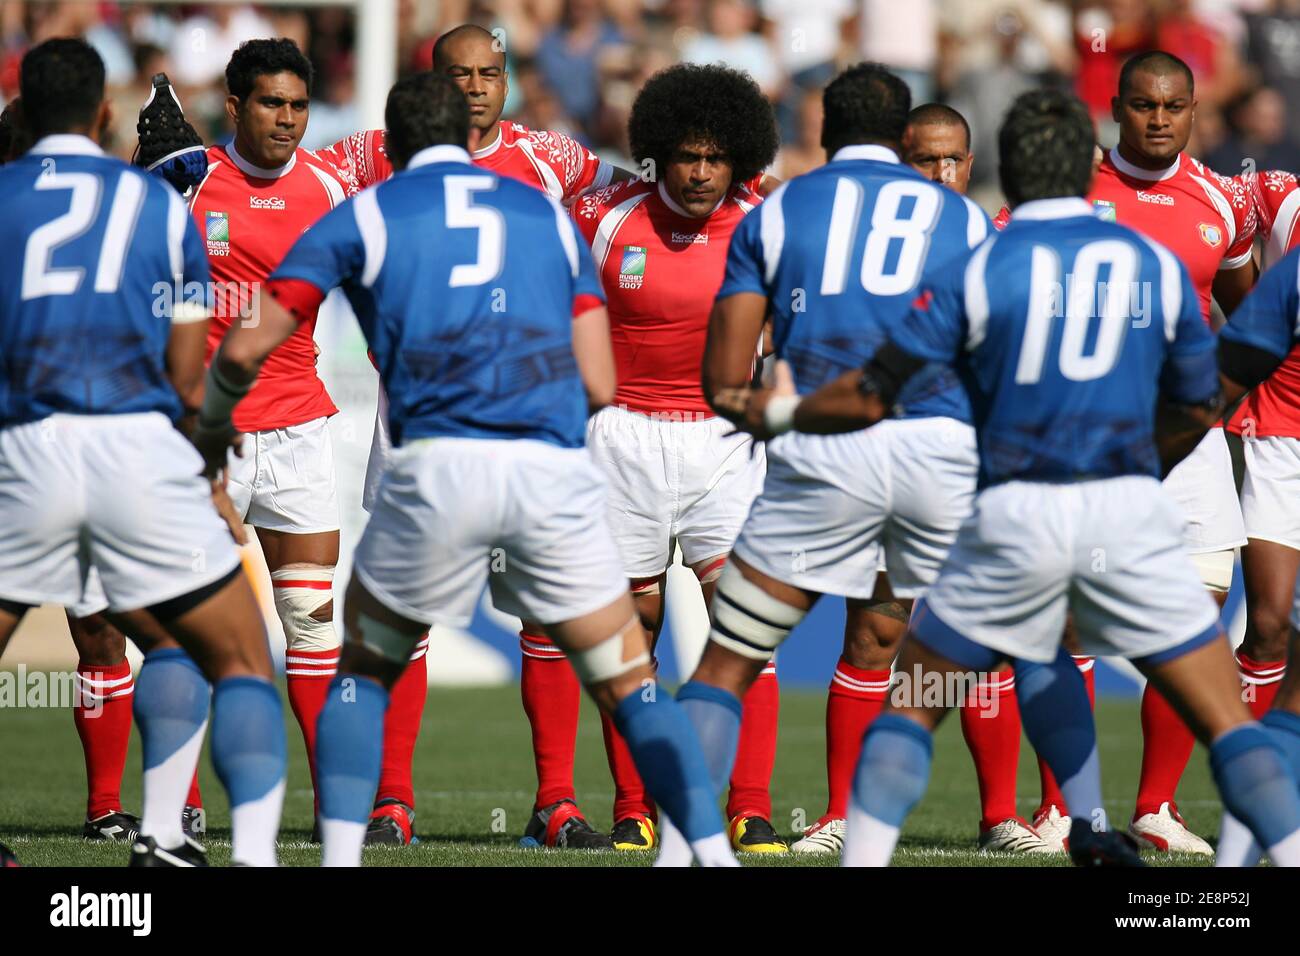 The team Haka during the IRB rugby union World Cup, Pool A, Samoa vs Tonga  at the Mosson stadium in Montpellier, France on September 19, 2007. Tonga  won 19-15. Photo by Stuart